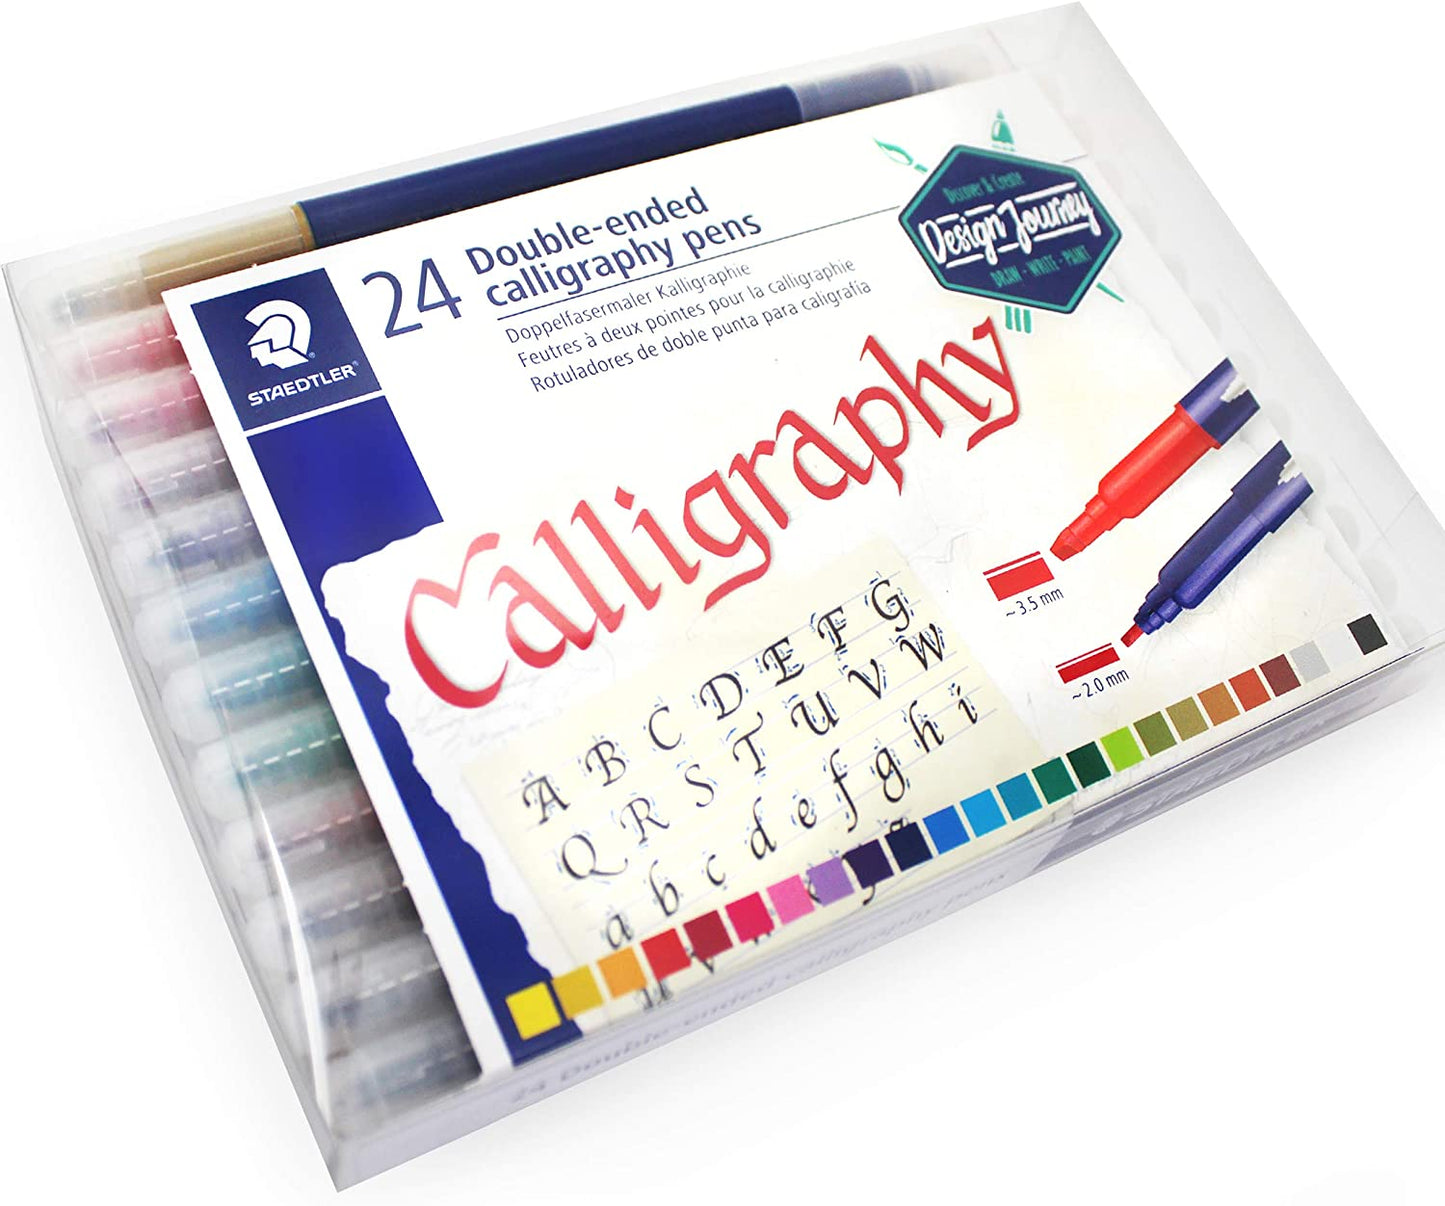 STAEDTLER DOUBLE ENDED CALLIGRAPHY PEN 24 COLOUR SET-3005 TB24